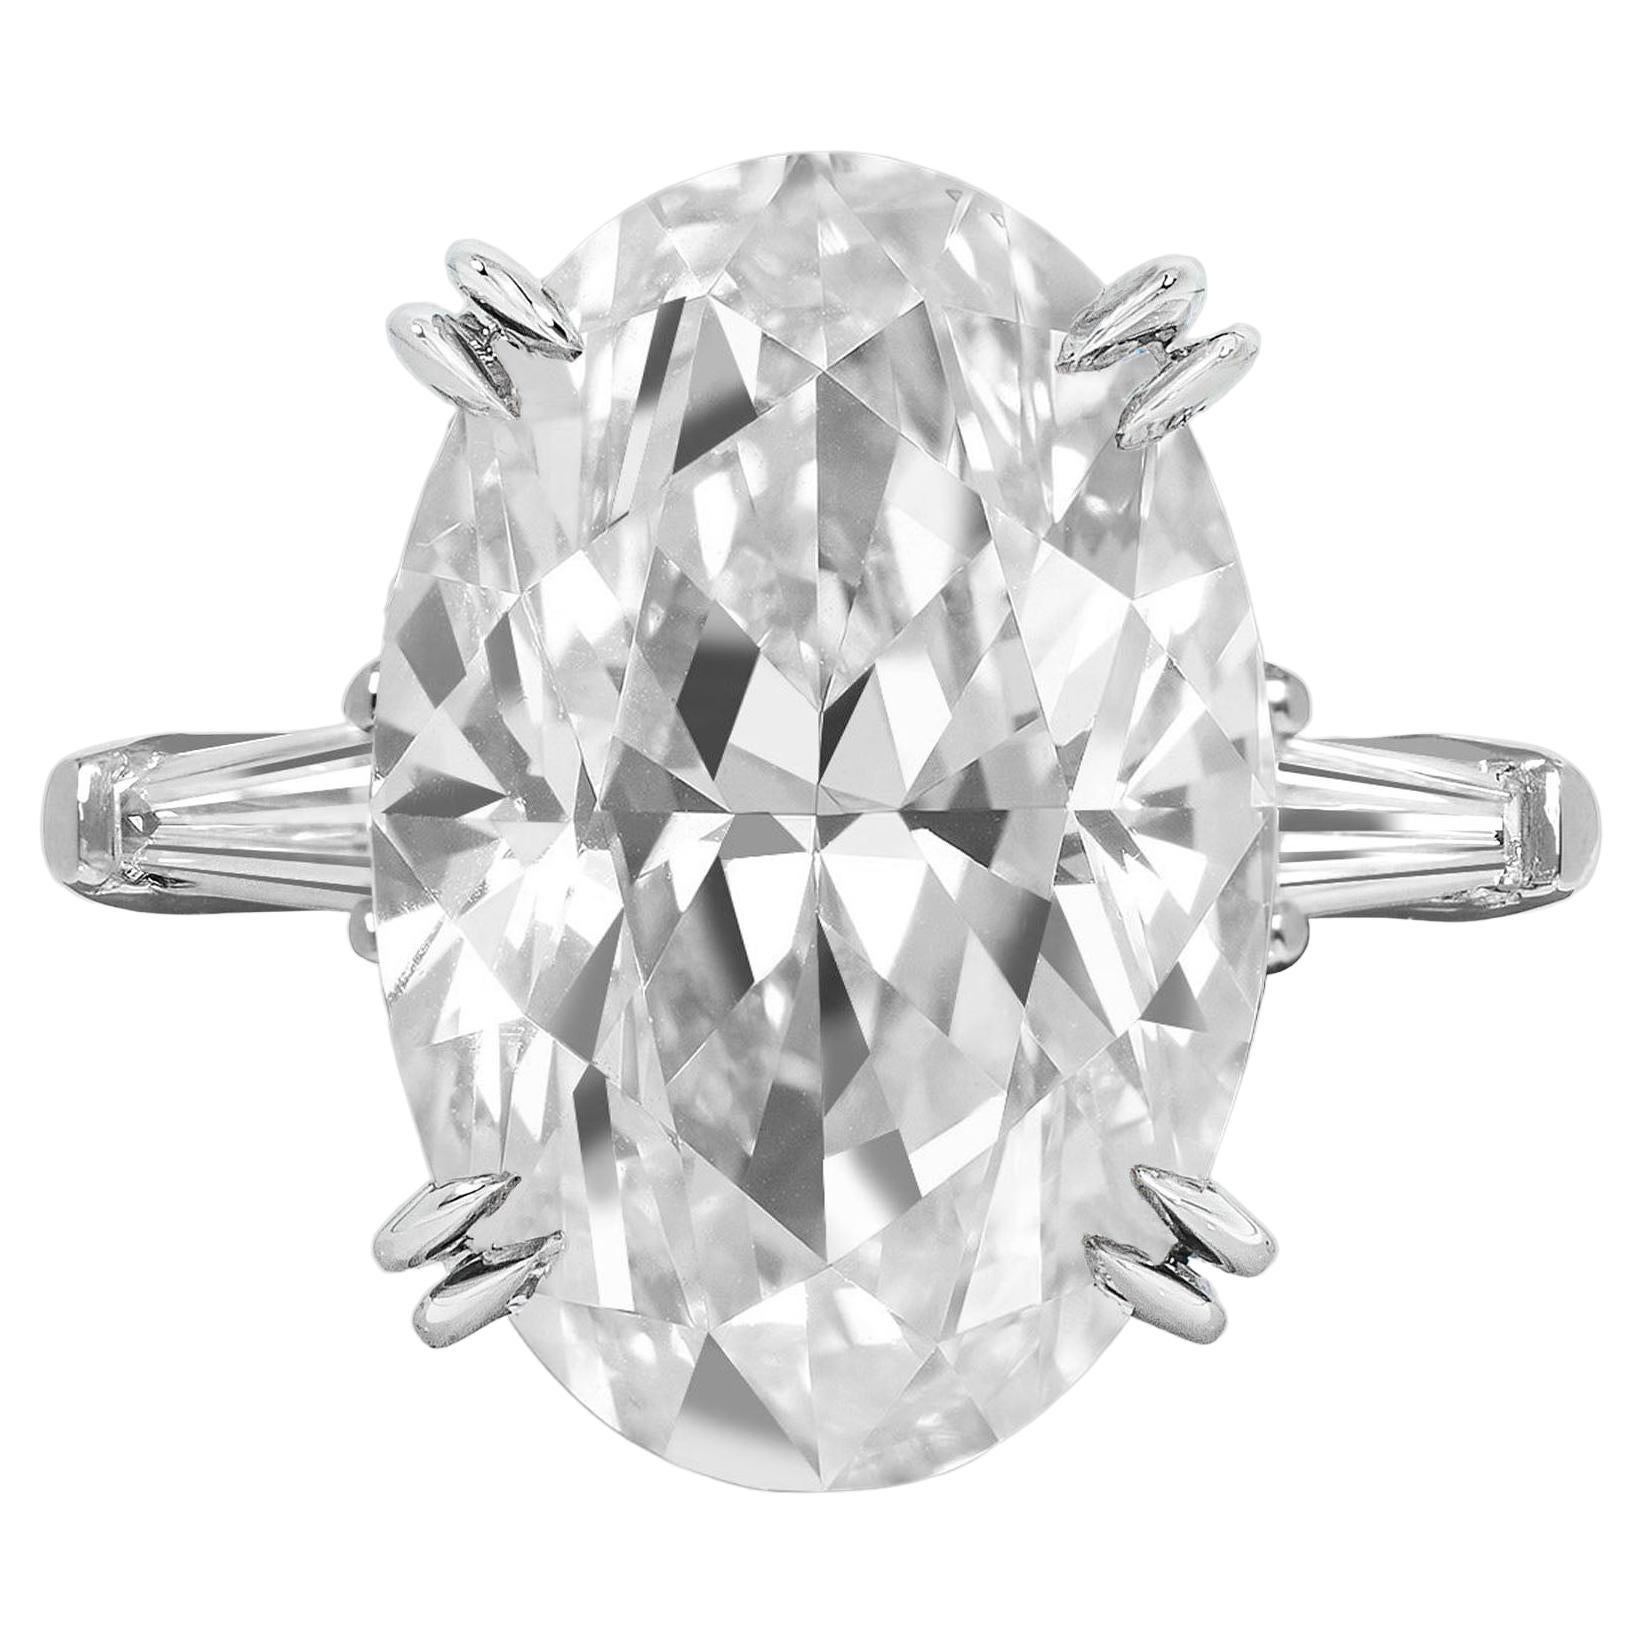 Exceptional GIA Certified 10 Carat Flawless Oval Diamond